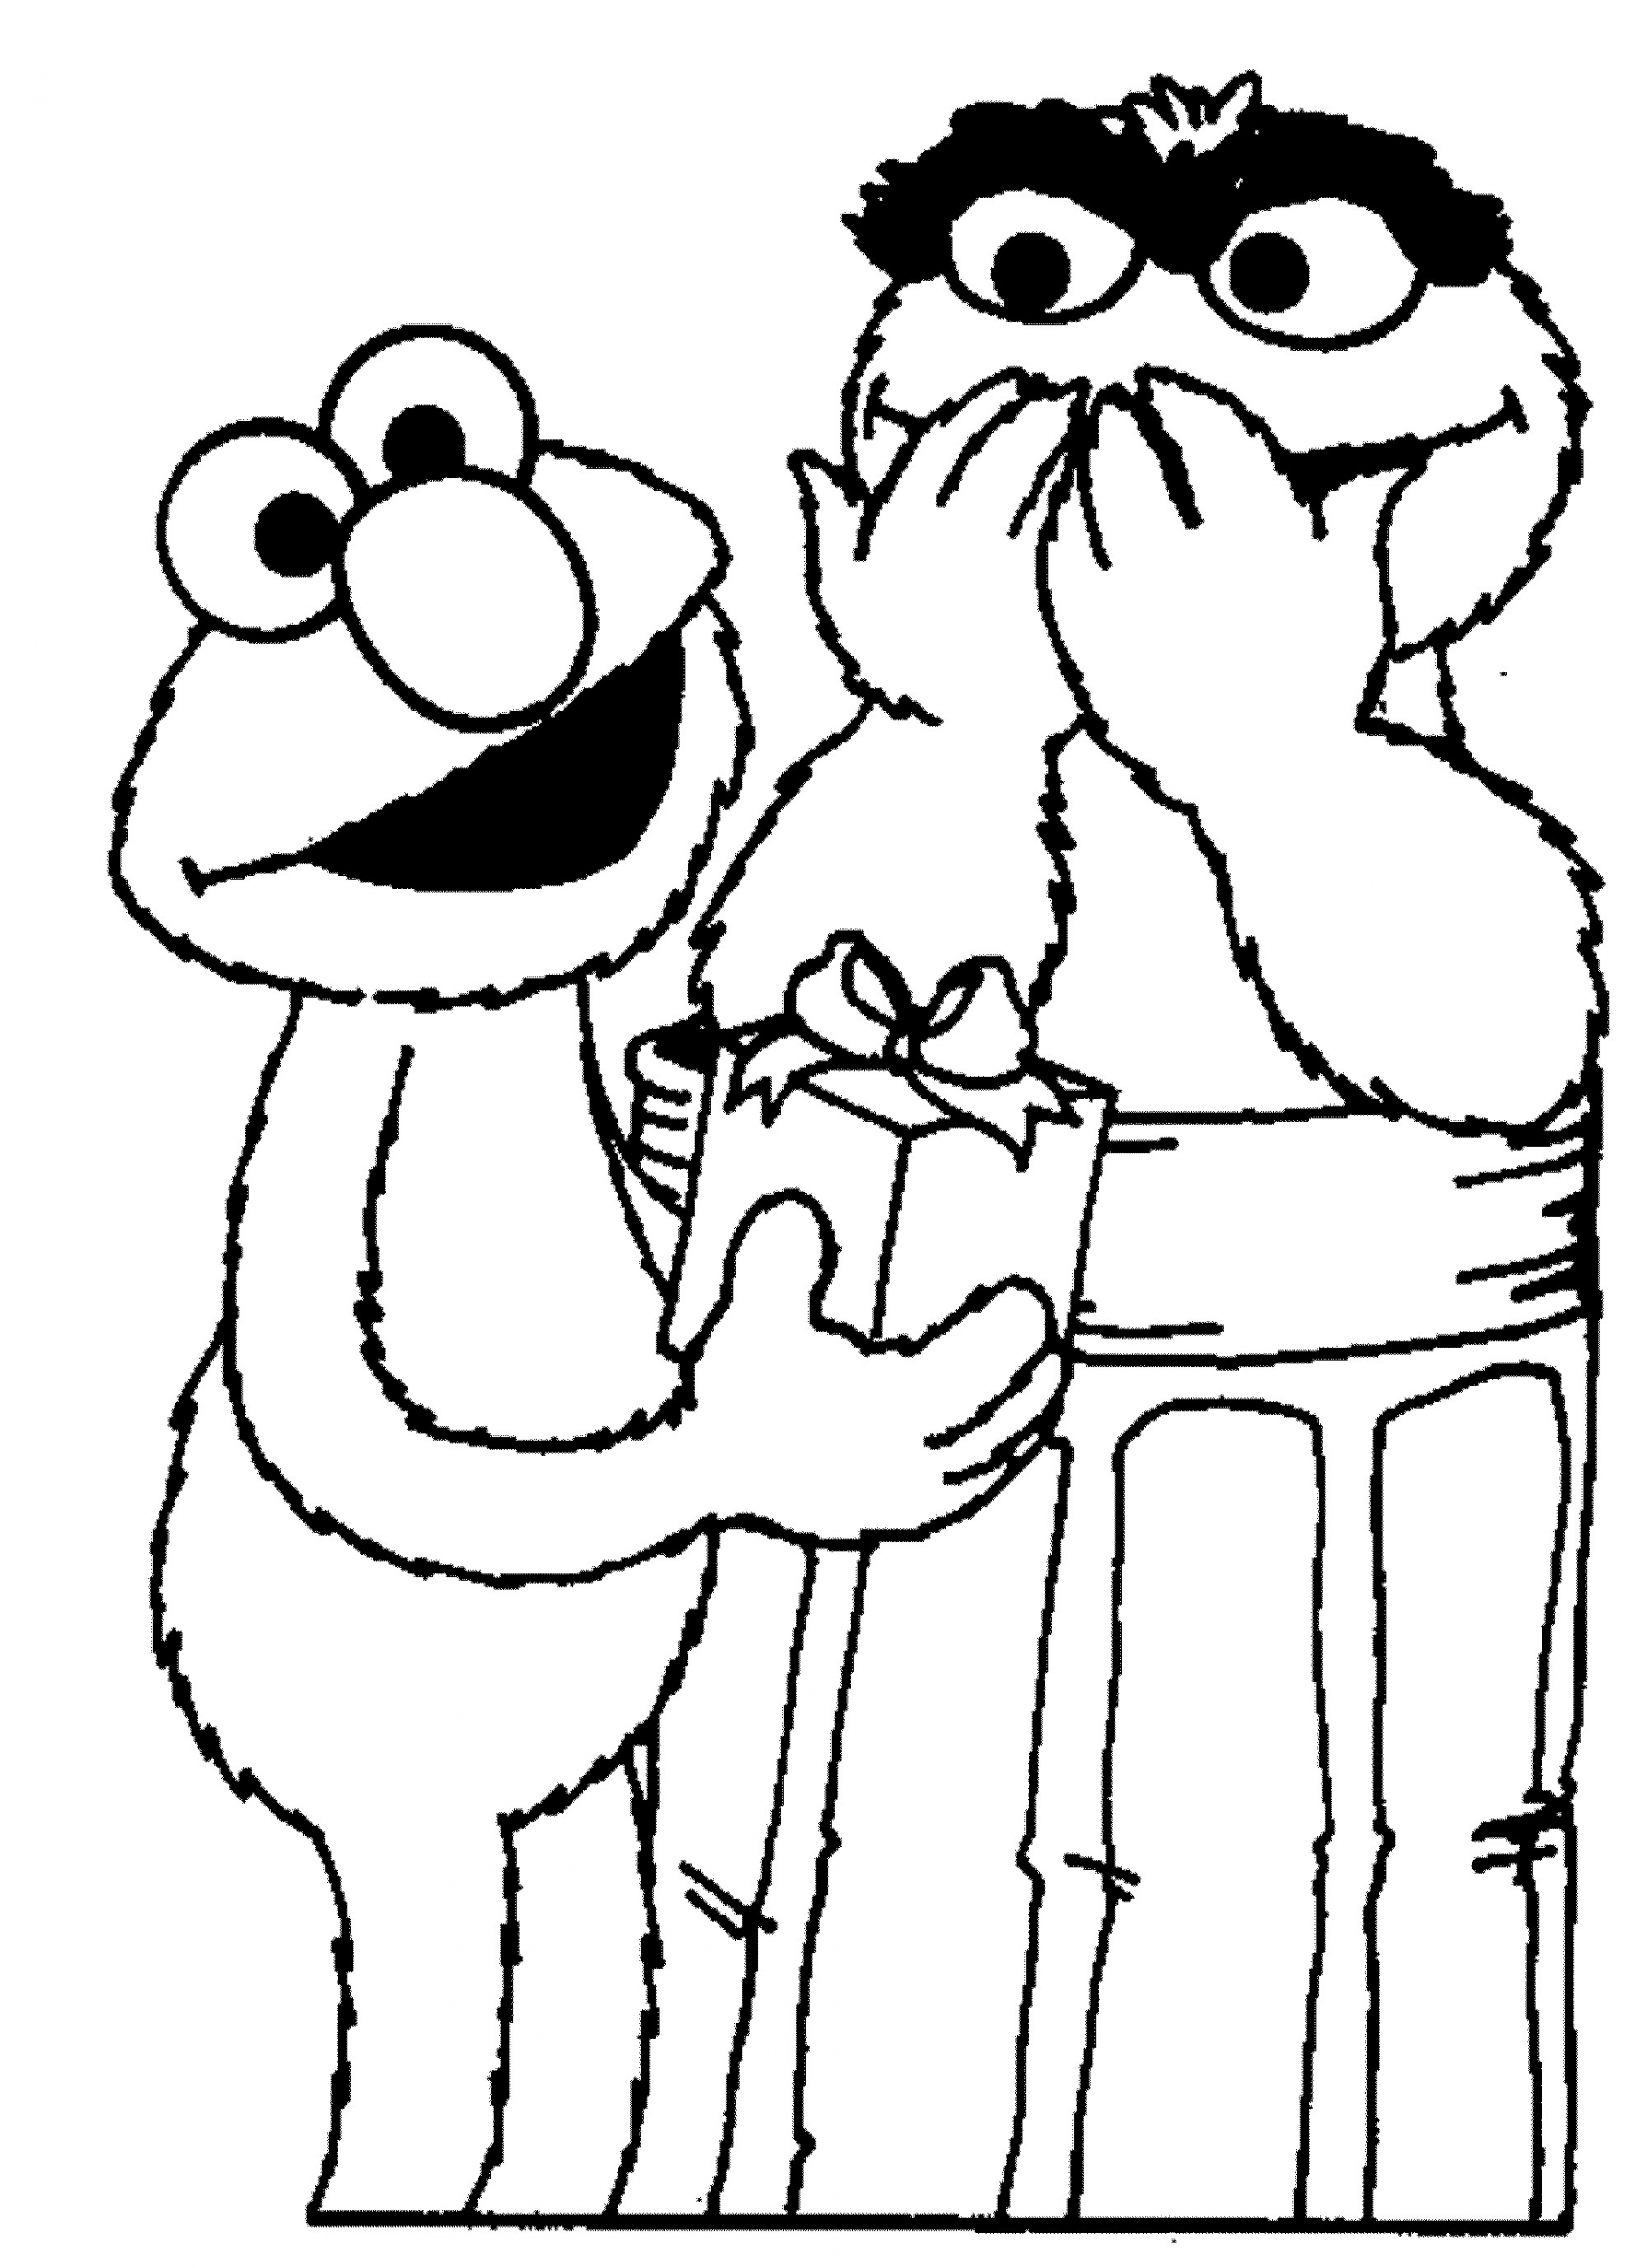 Free Printable Elmo Coloring Pages
 Print & Download Elmo Coloring Pages for Children’s Home